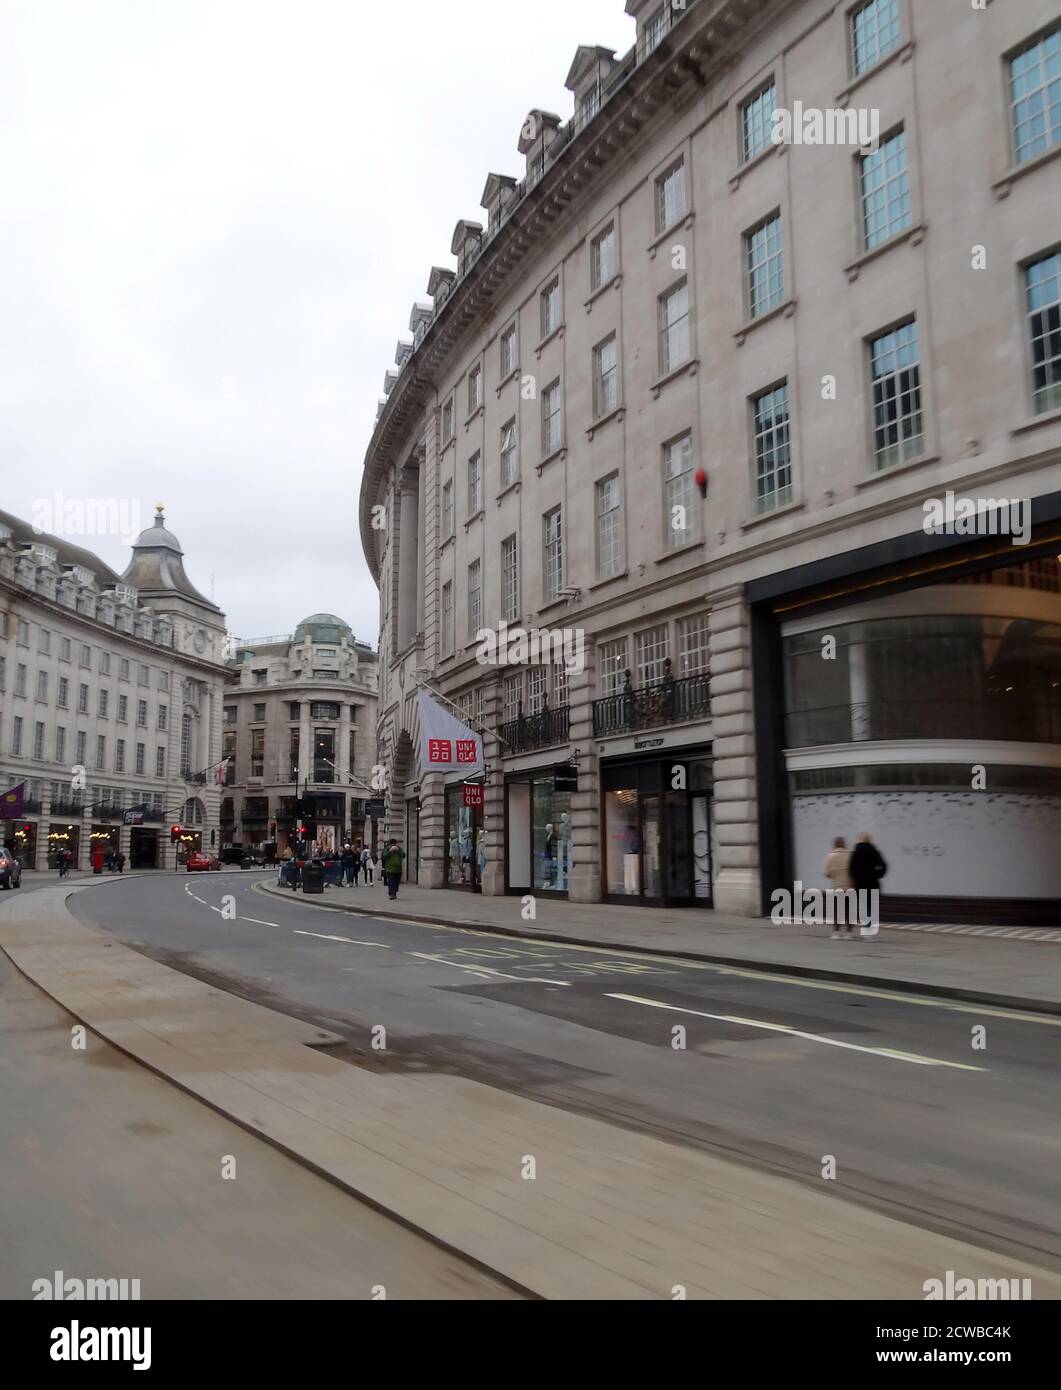 Regent Street, London is deserted by tourists and shoppers, during the COVID-19 pandemic, March 14th 2020 Stock Photo